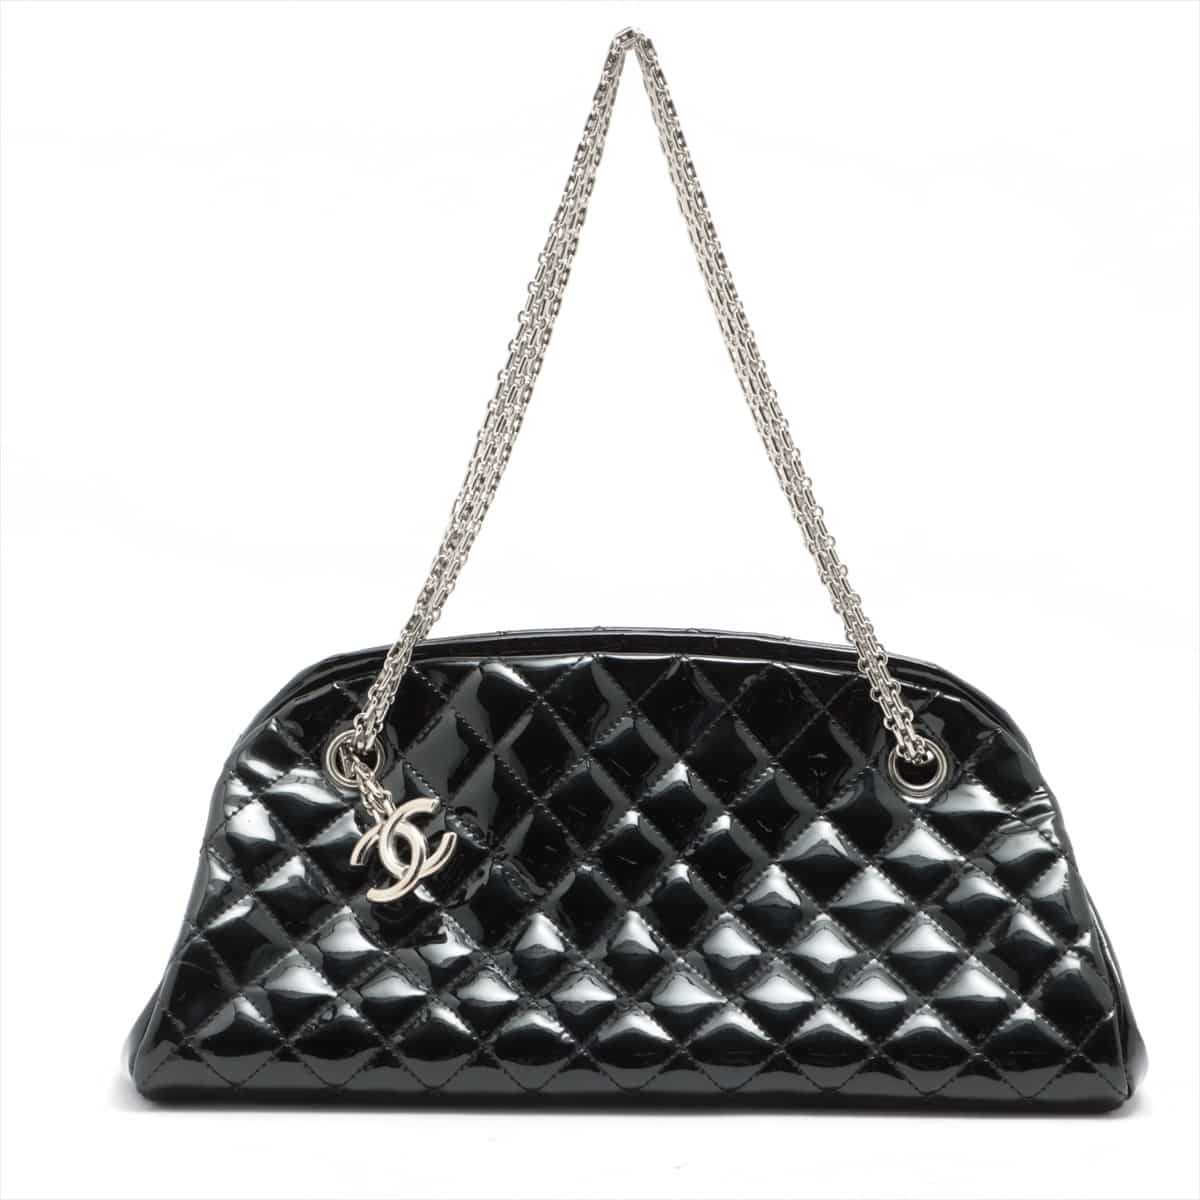 Chanel Mademoiselle Patent leather Chain shoulder bag Black Silver Metal fittings 15XXXXXX